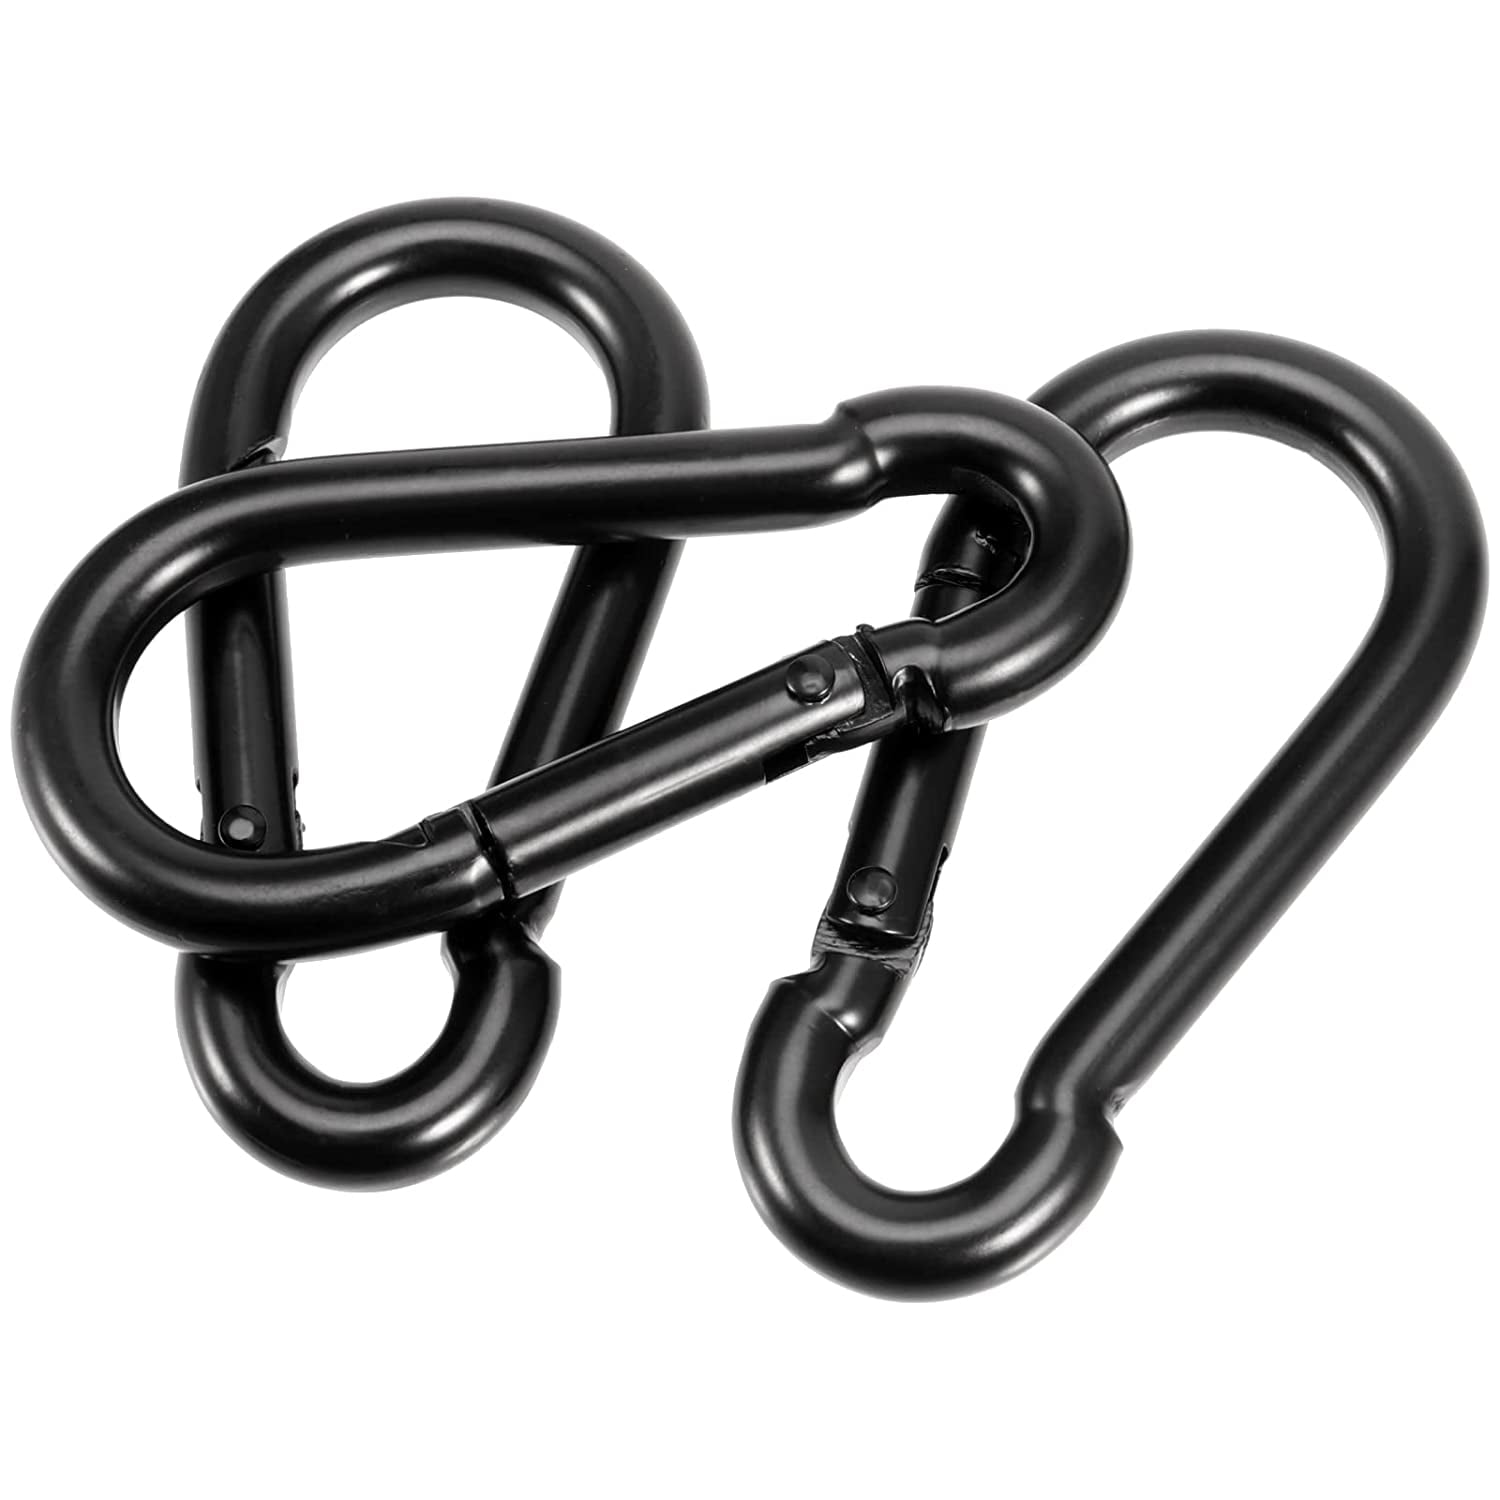 Black Spring Snap Hook, 20 Pack 5/16 x 3 Inches Heavy Duty